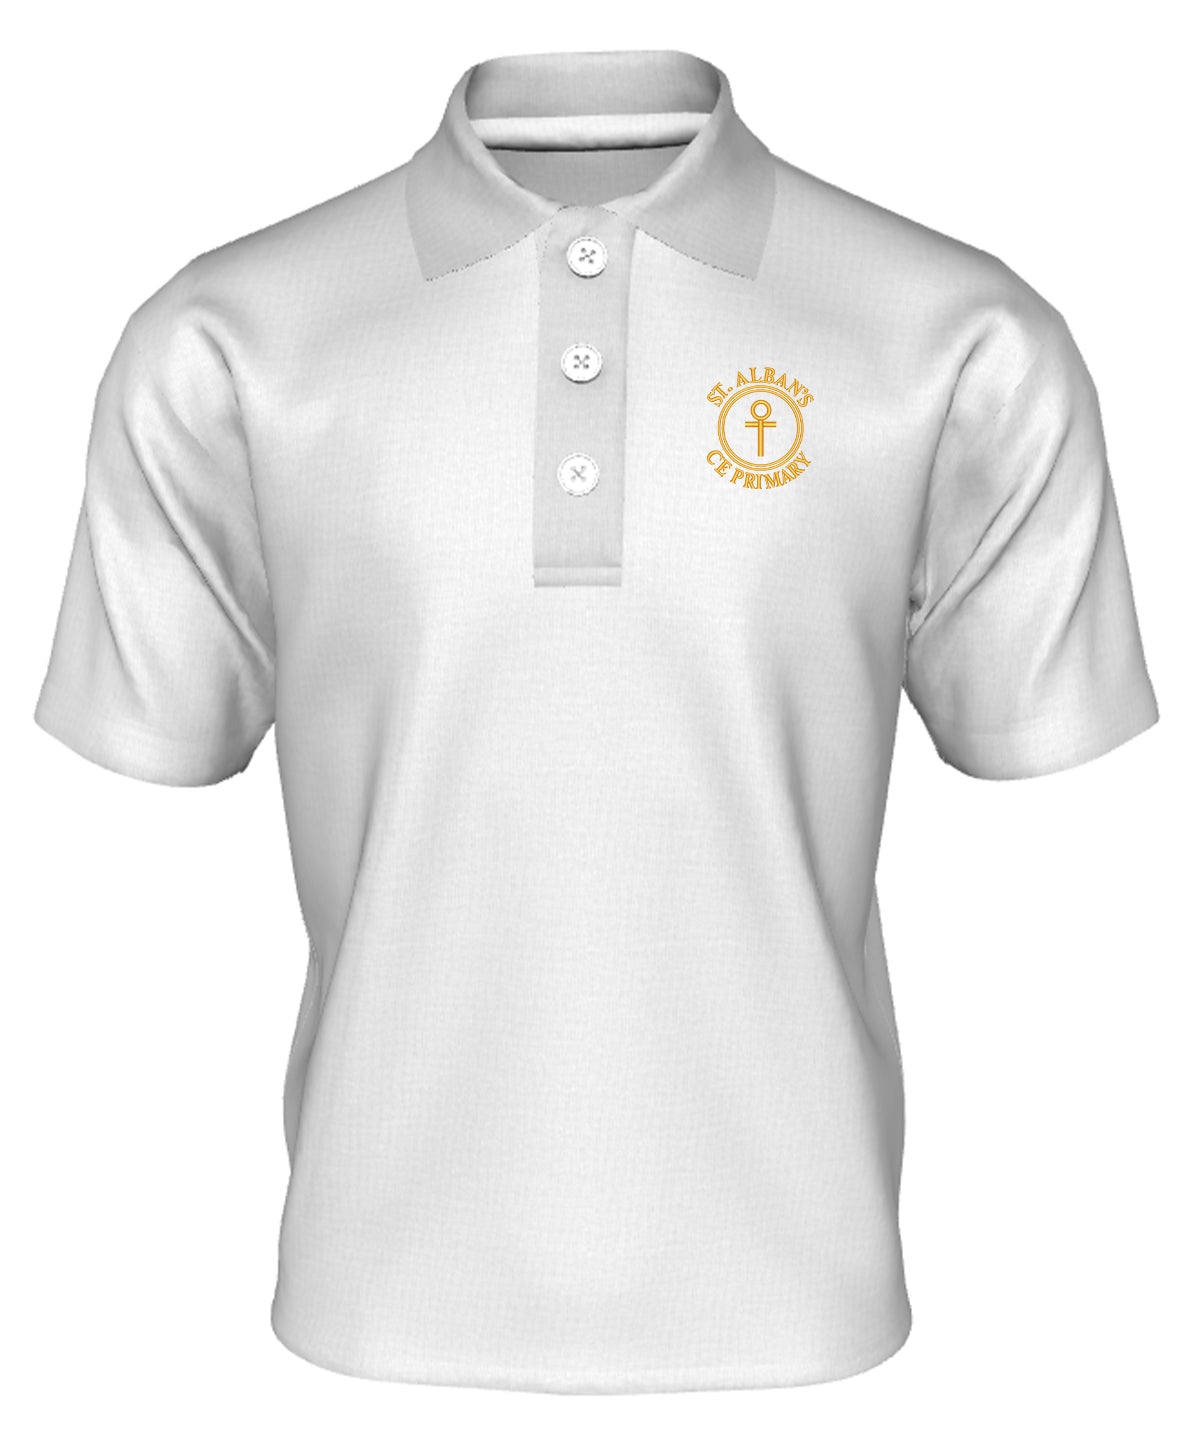 St Alban's CE Primary School - Polo Shirt